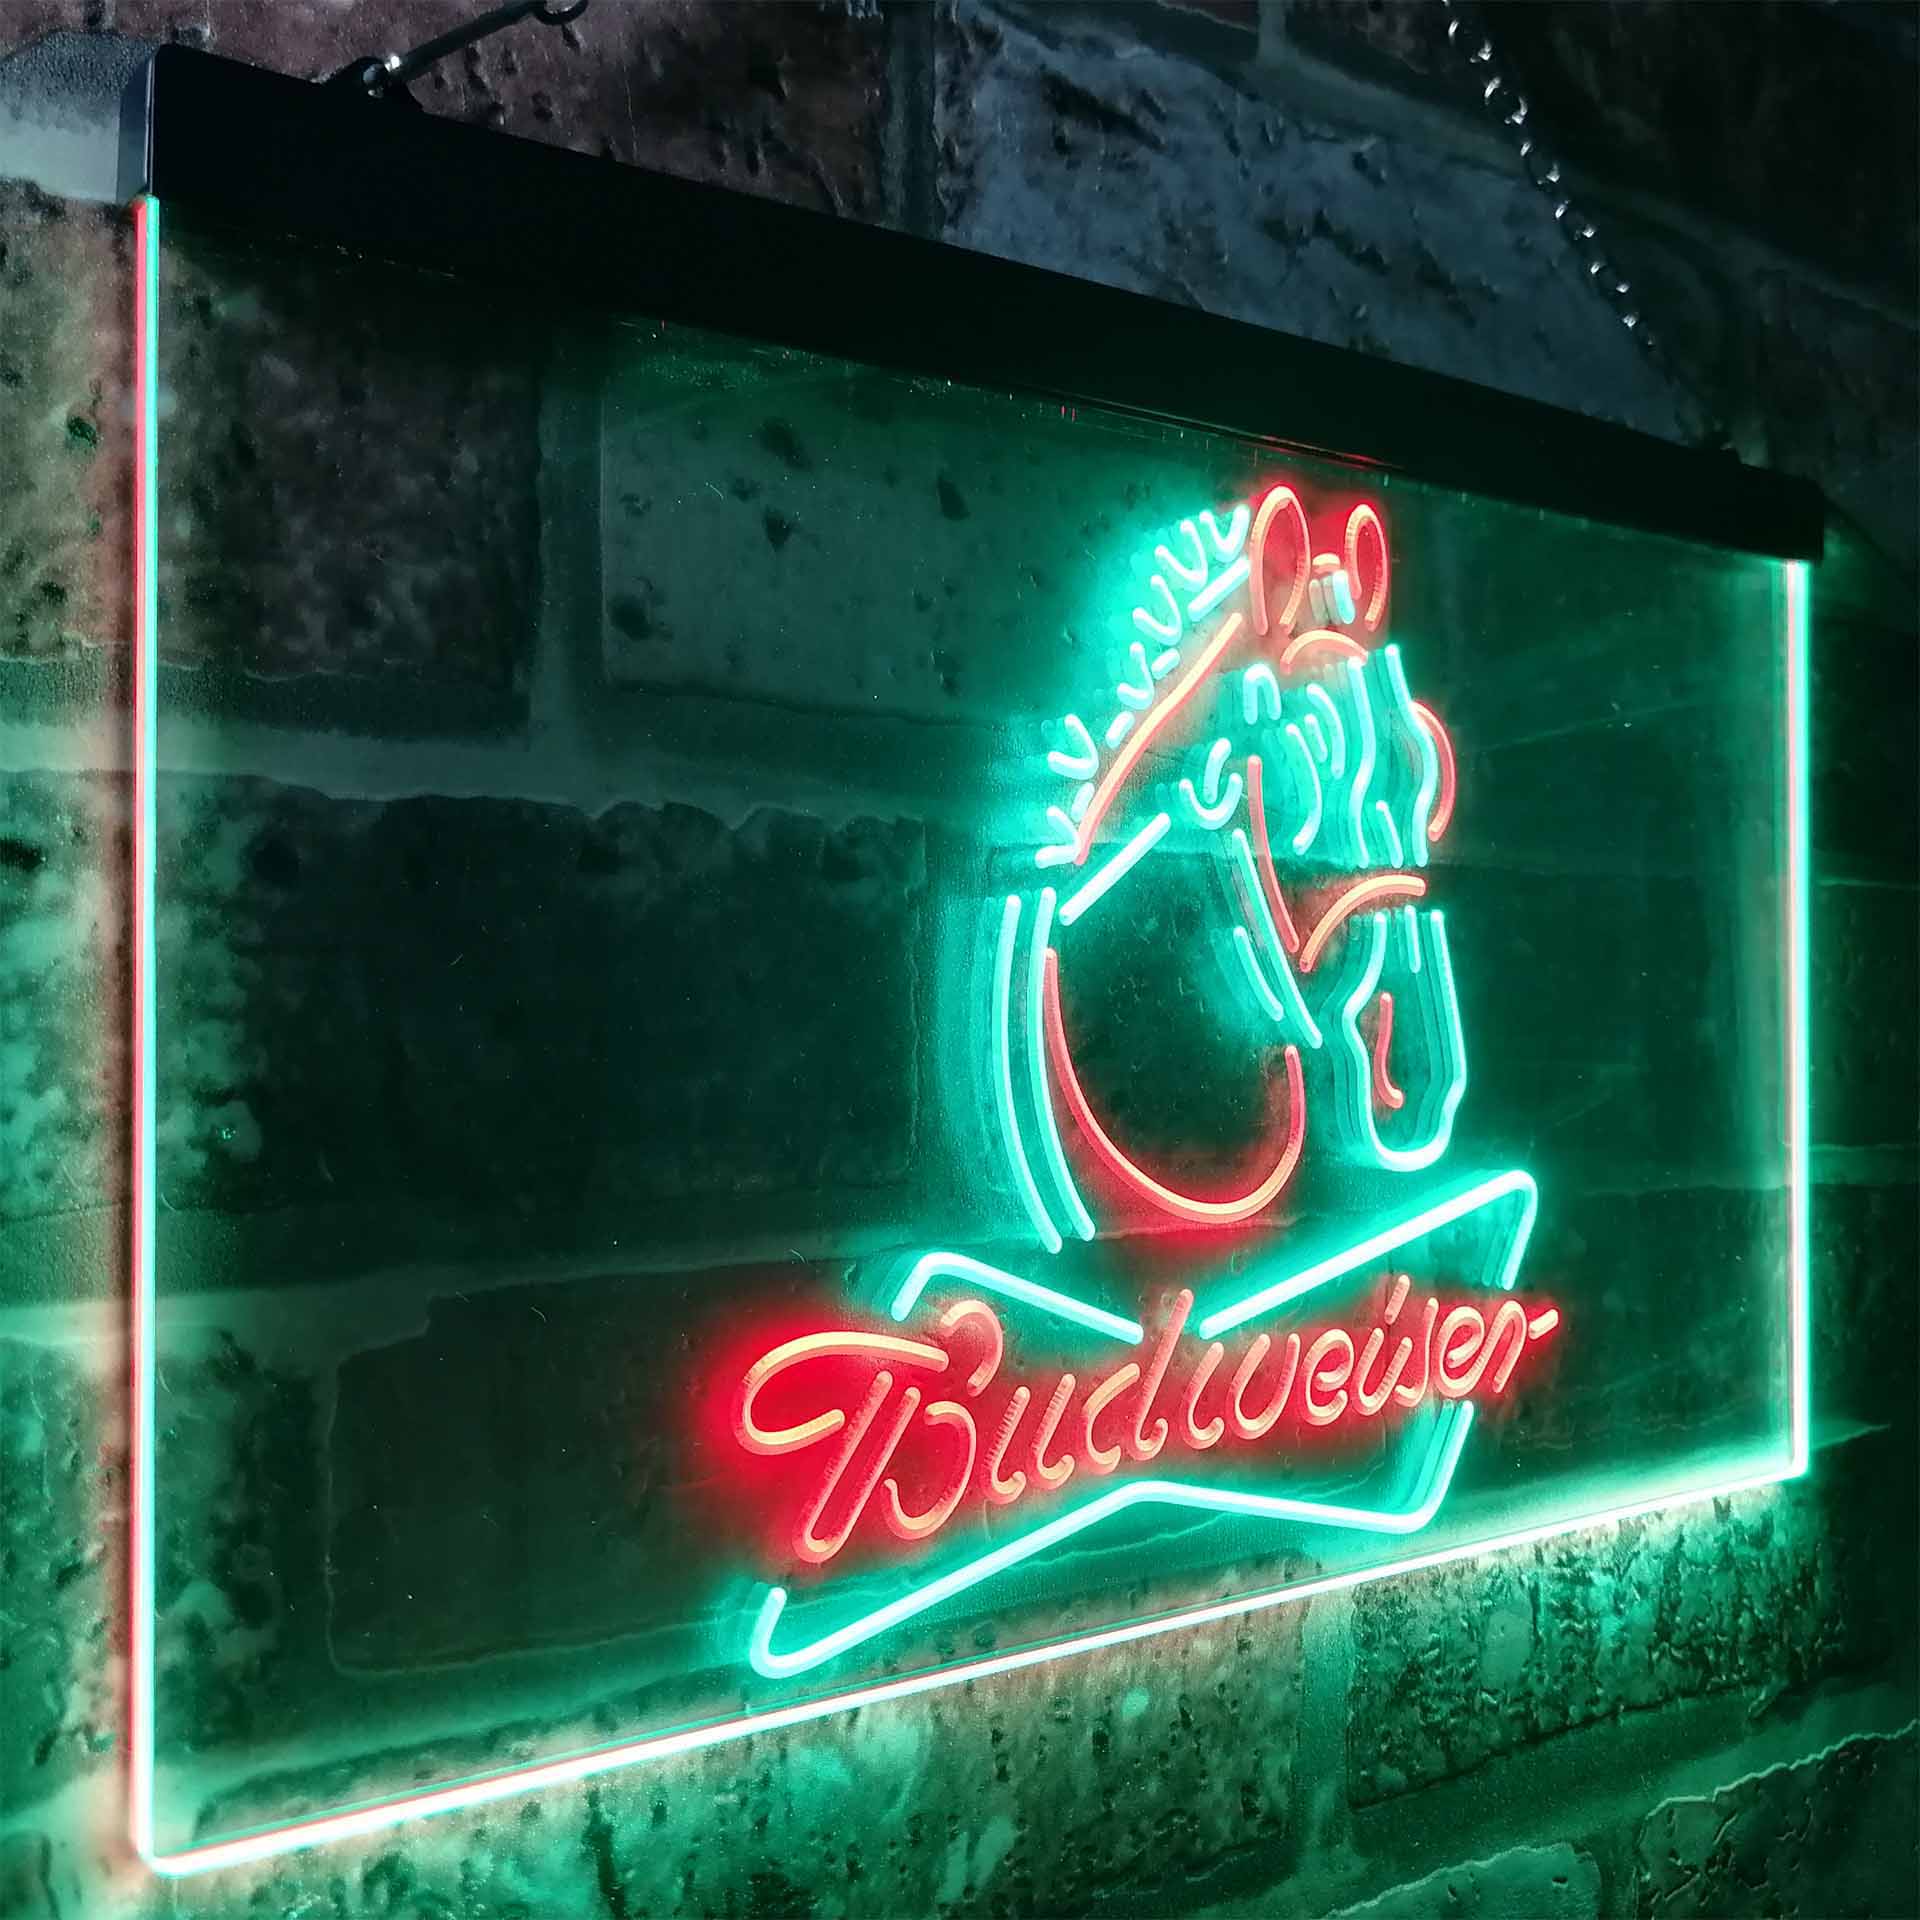 Budweiser Clydesdale Horse Head LED Neon Sign